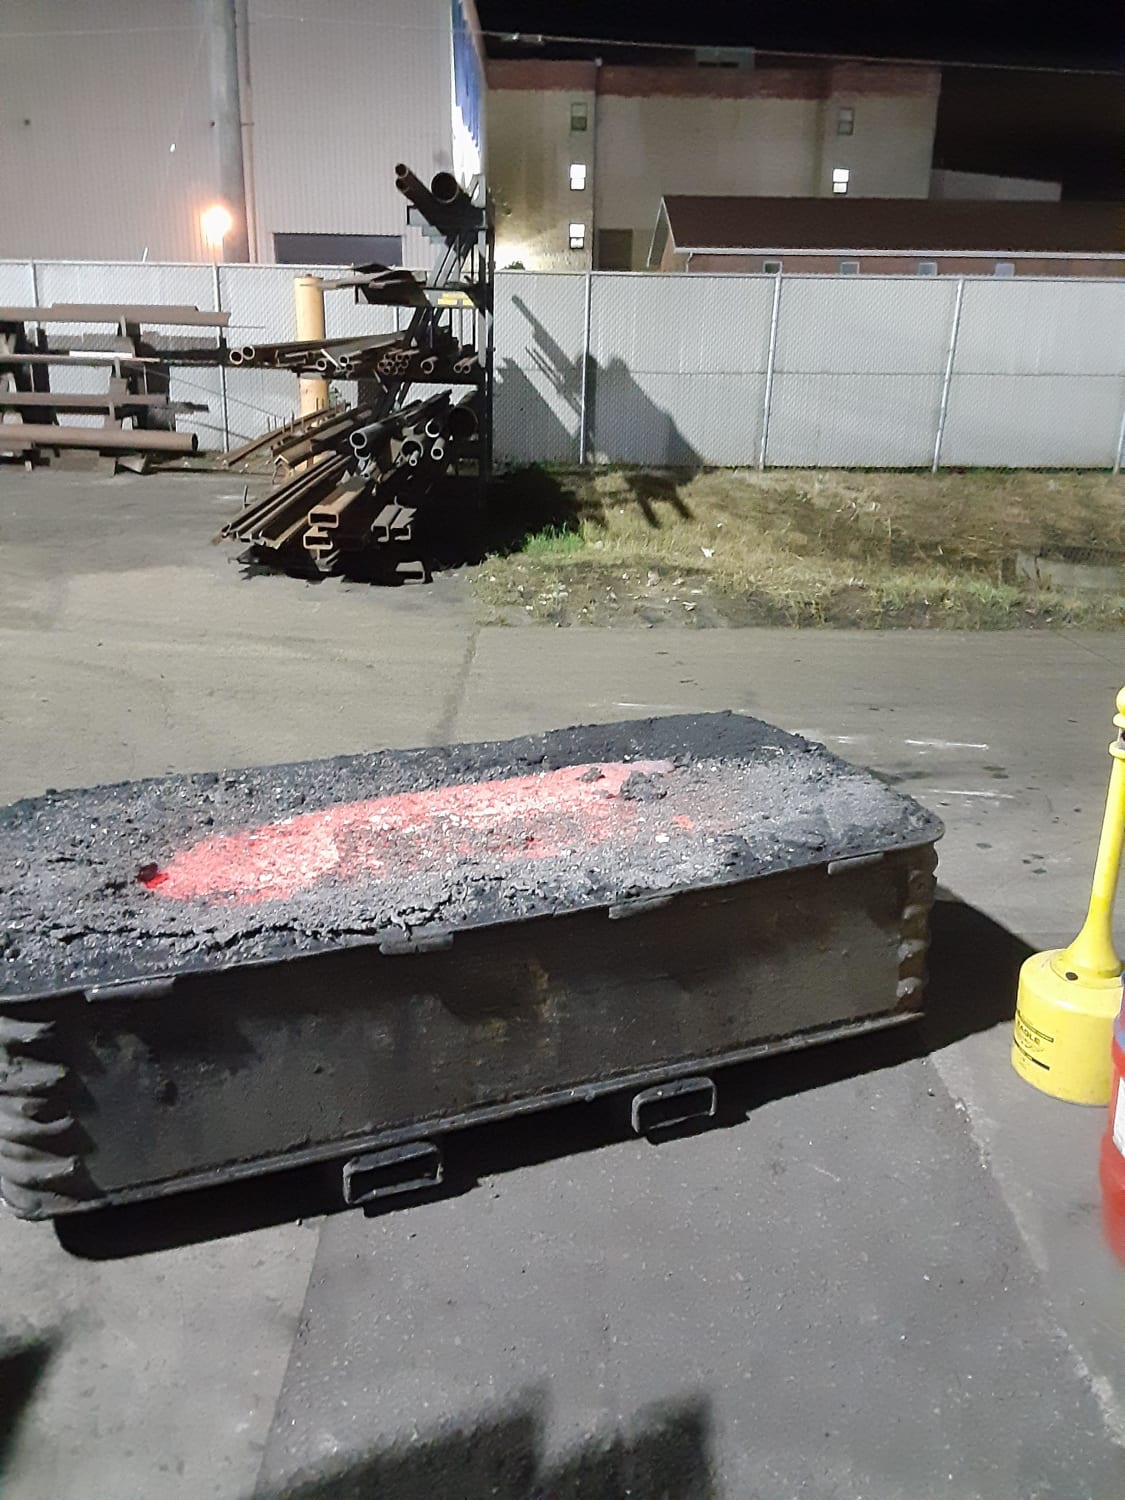 My job puts molten iron by the break area to keep warm when it cools off outside